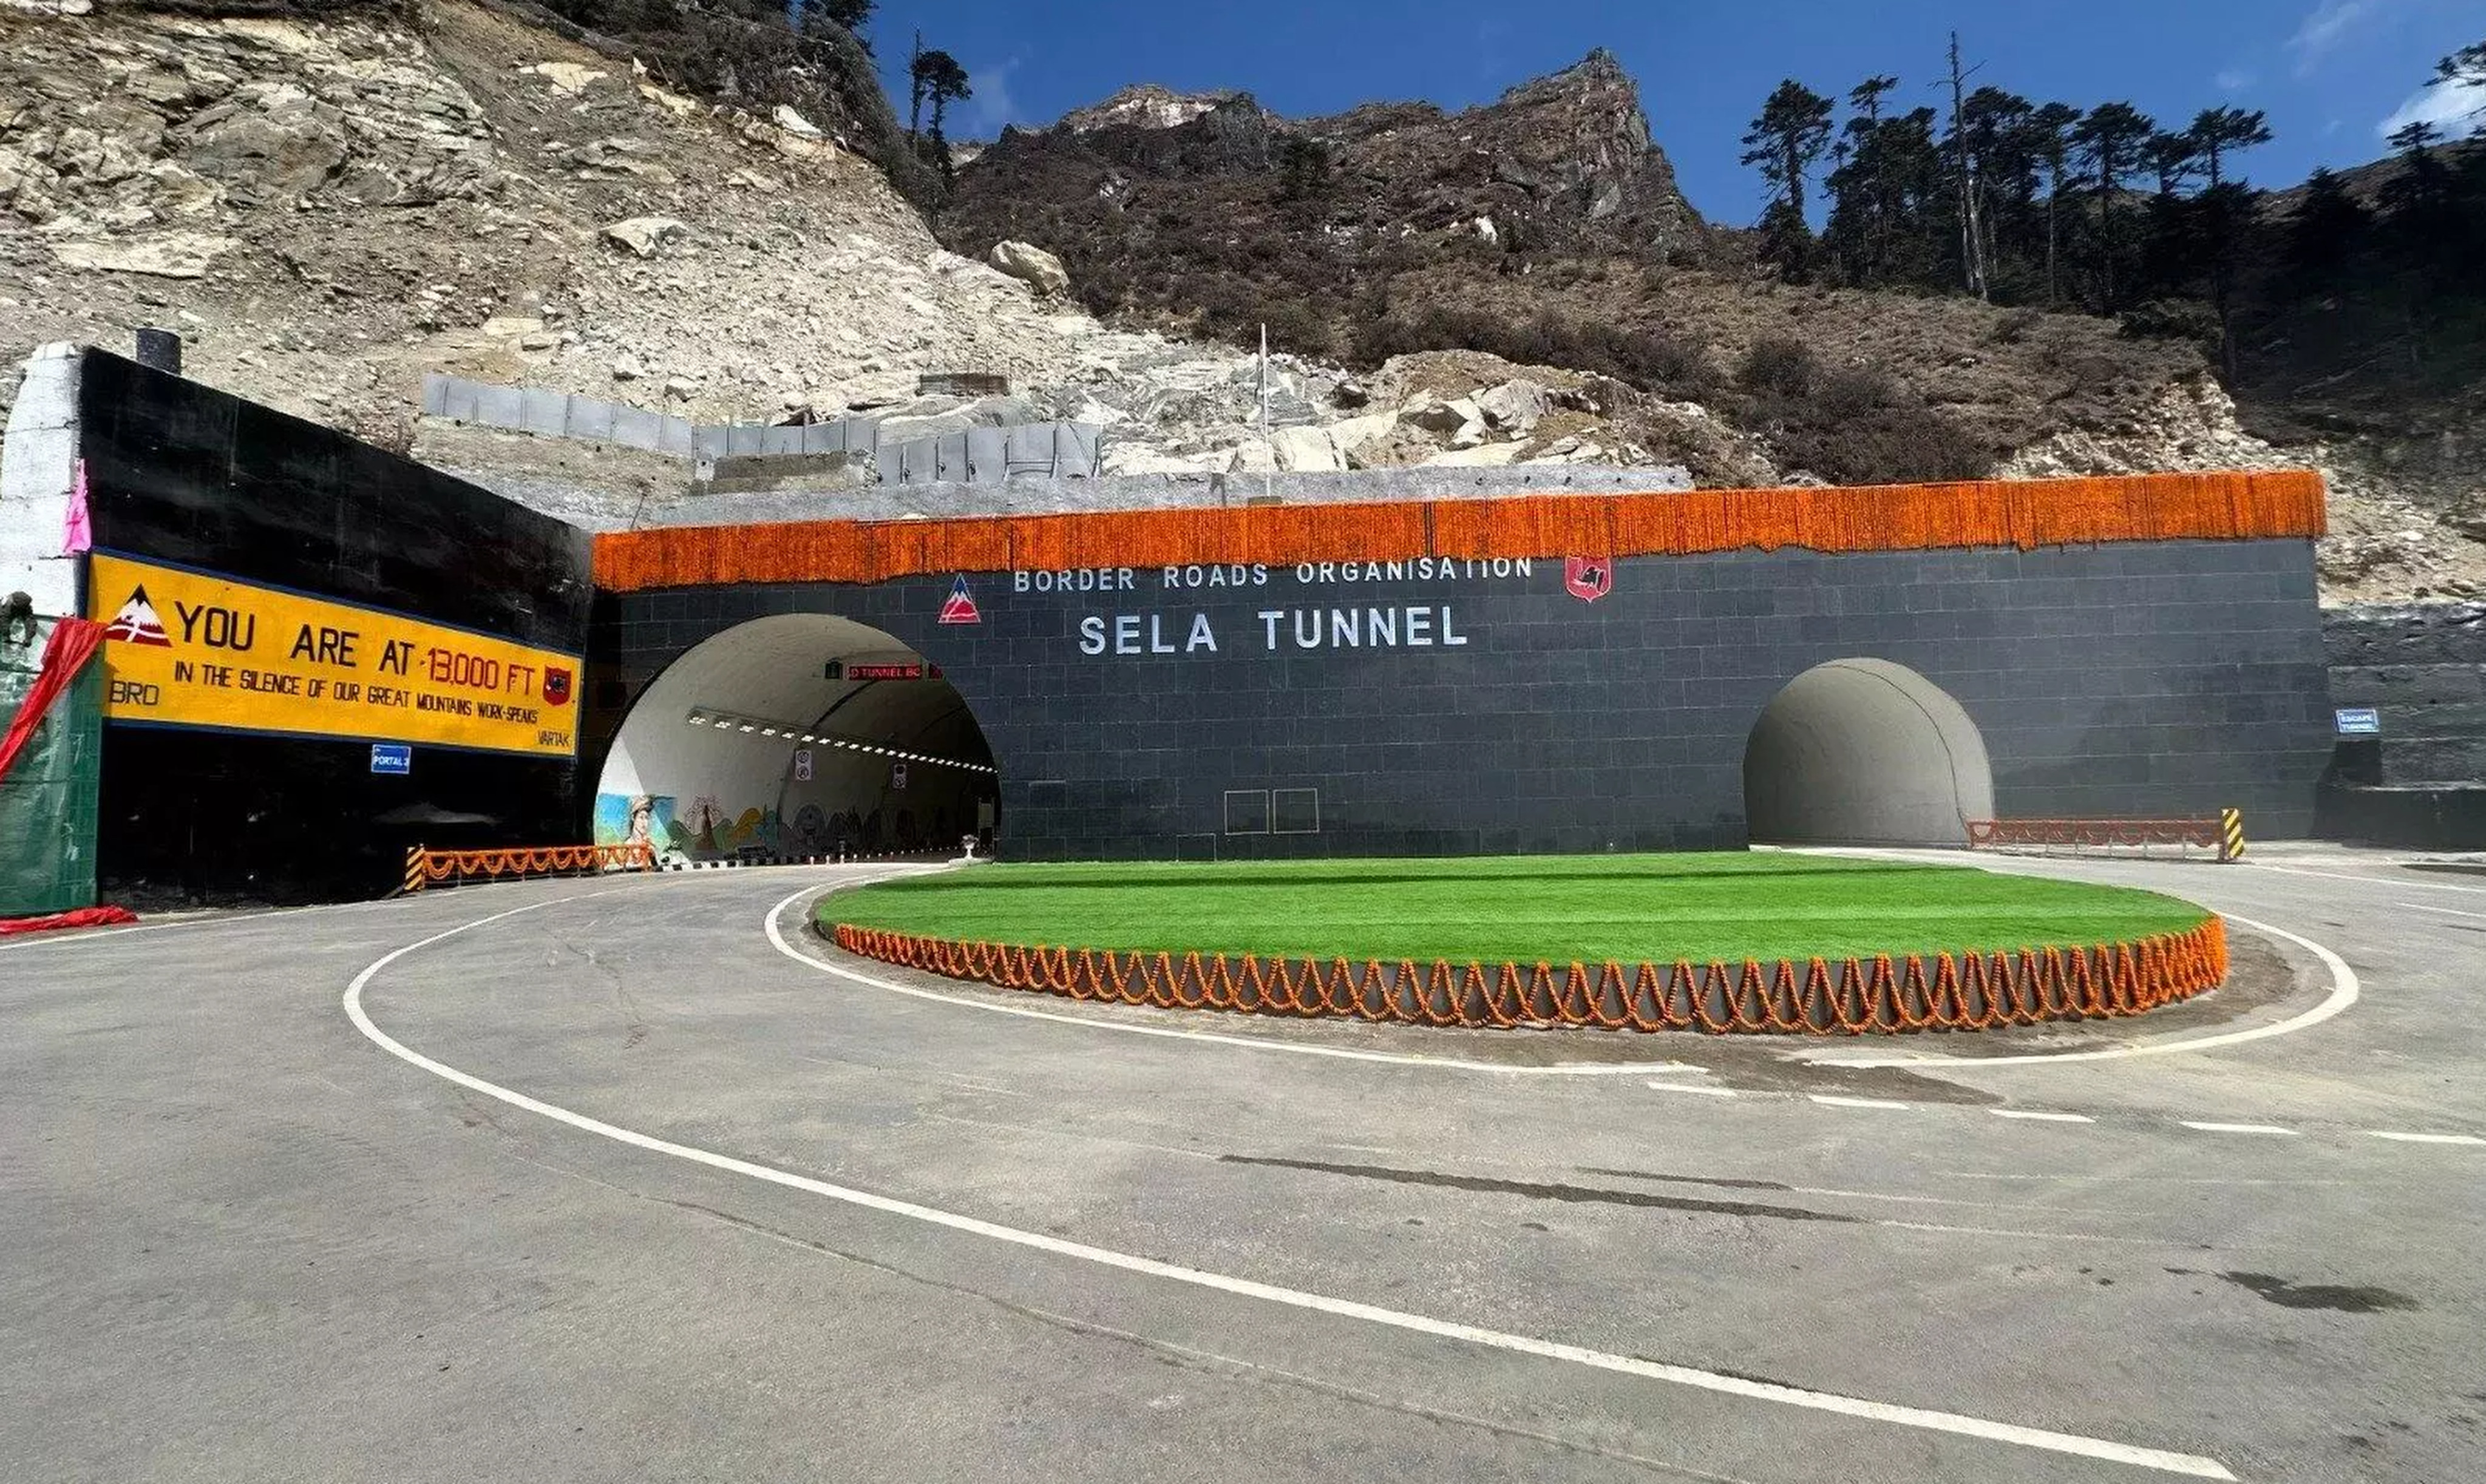 The opening of the Sela Tunnel in the disputed Himalayan border region between China and India has sparked a strong response from Beijing. Photo: X/gemsofbabus_